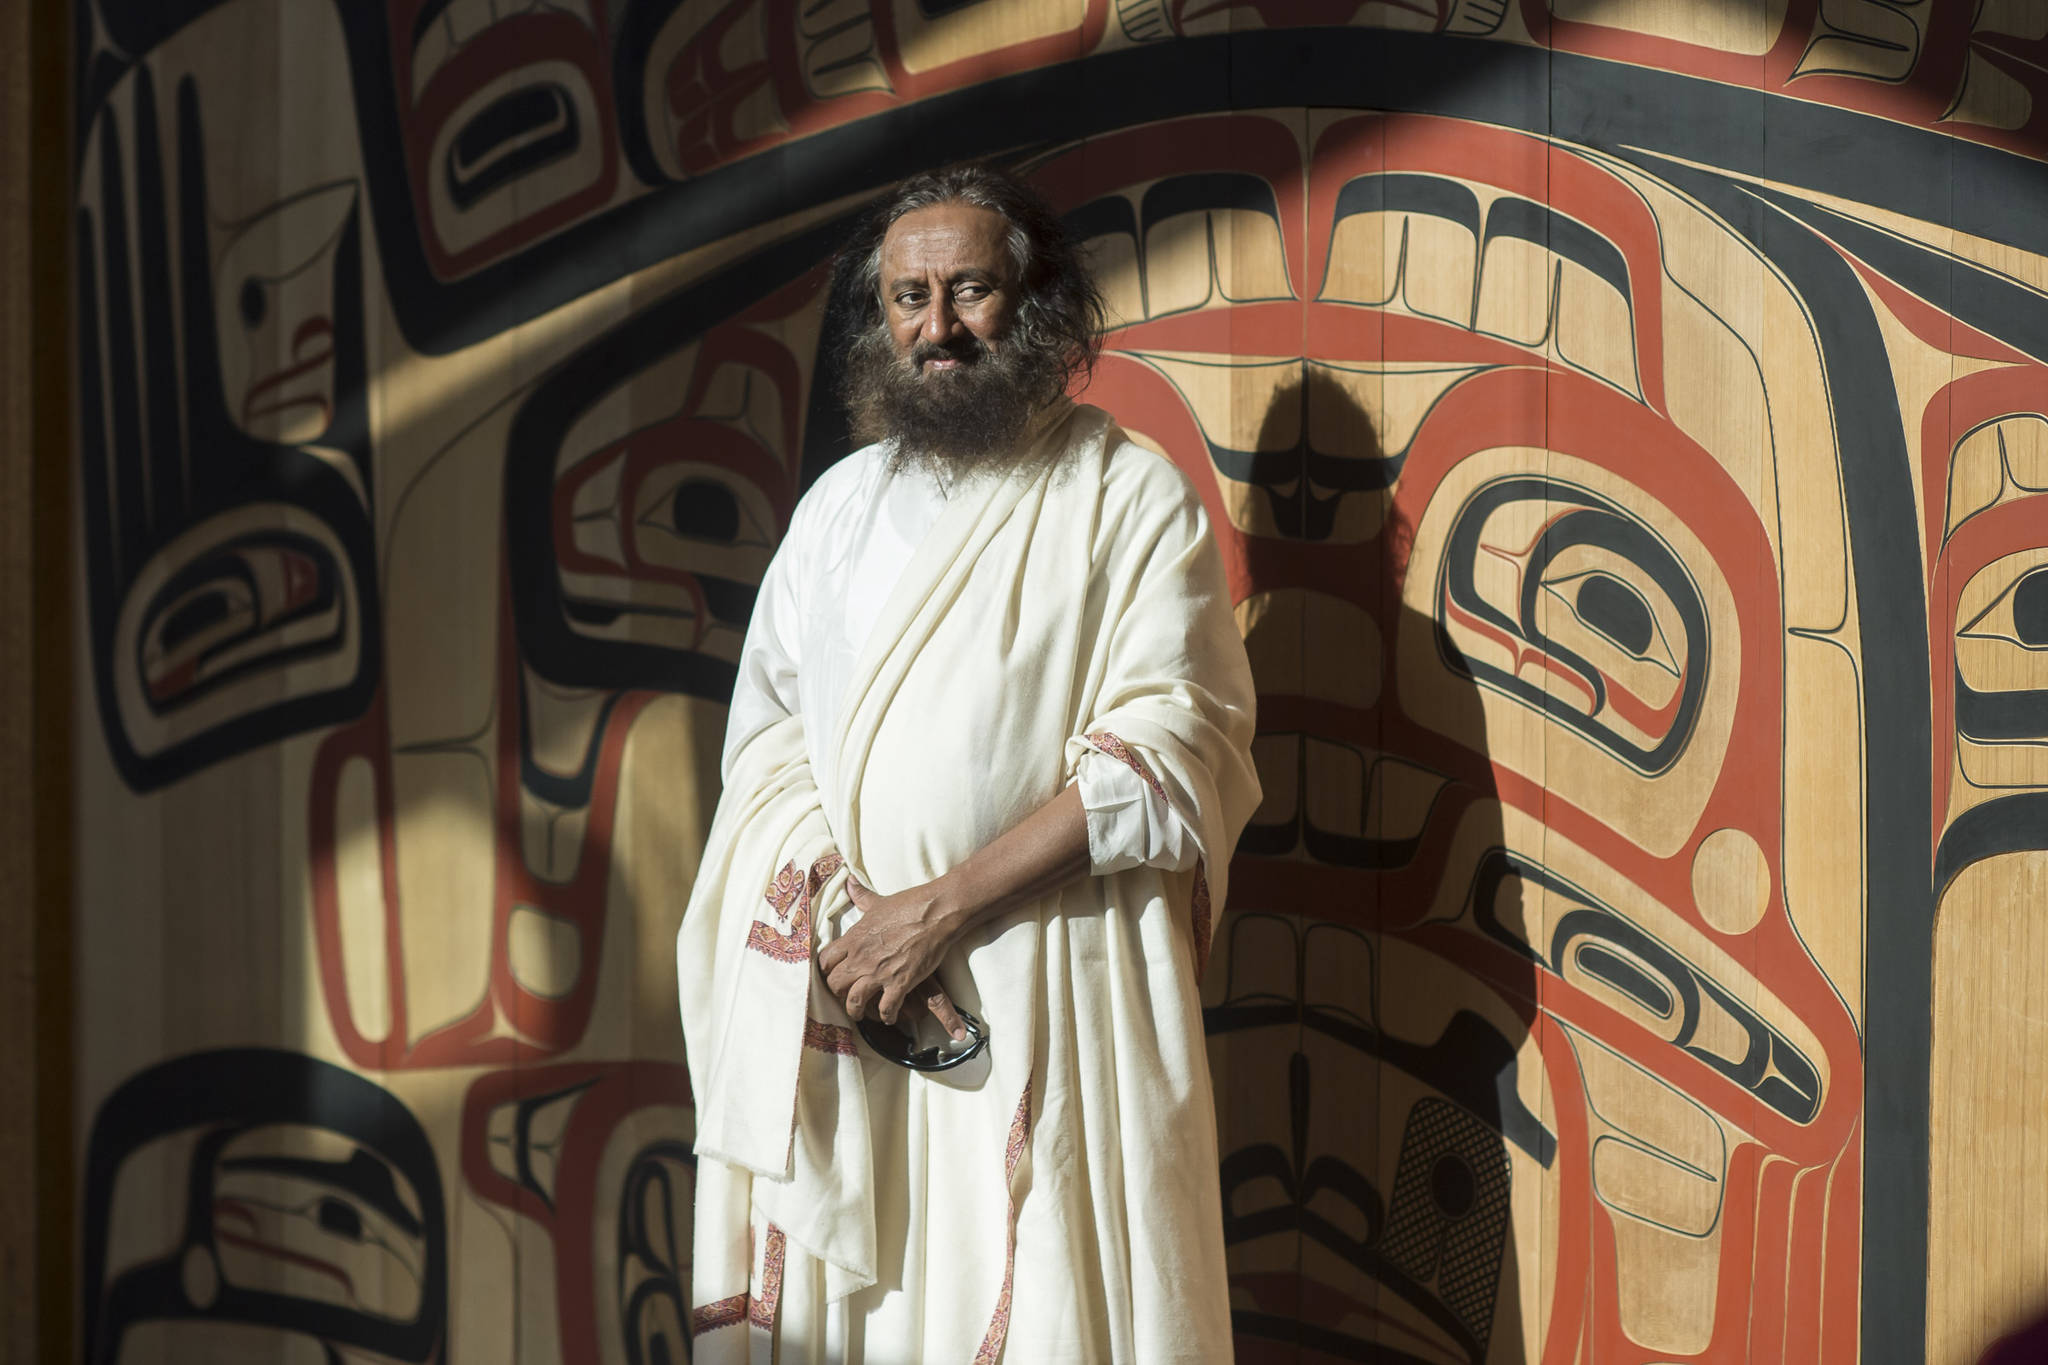 Spiritual leader Sri Sri Ravi Shankar of The Art of Living Foundation visits the Walter Soboleff Center on Tuesday, July 31, 2018, as part of his West Coast Tour that also includes San Francisco and Seattle. (Michael Penn | Juneau Empire)